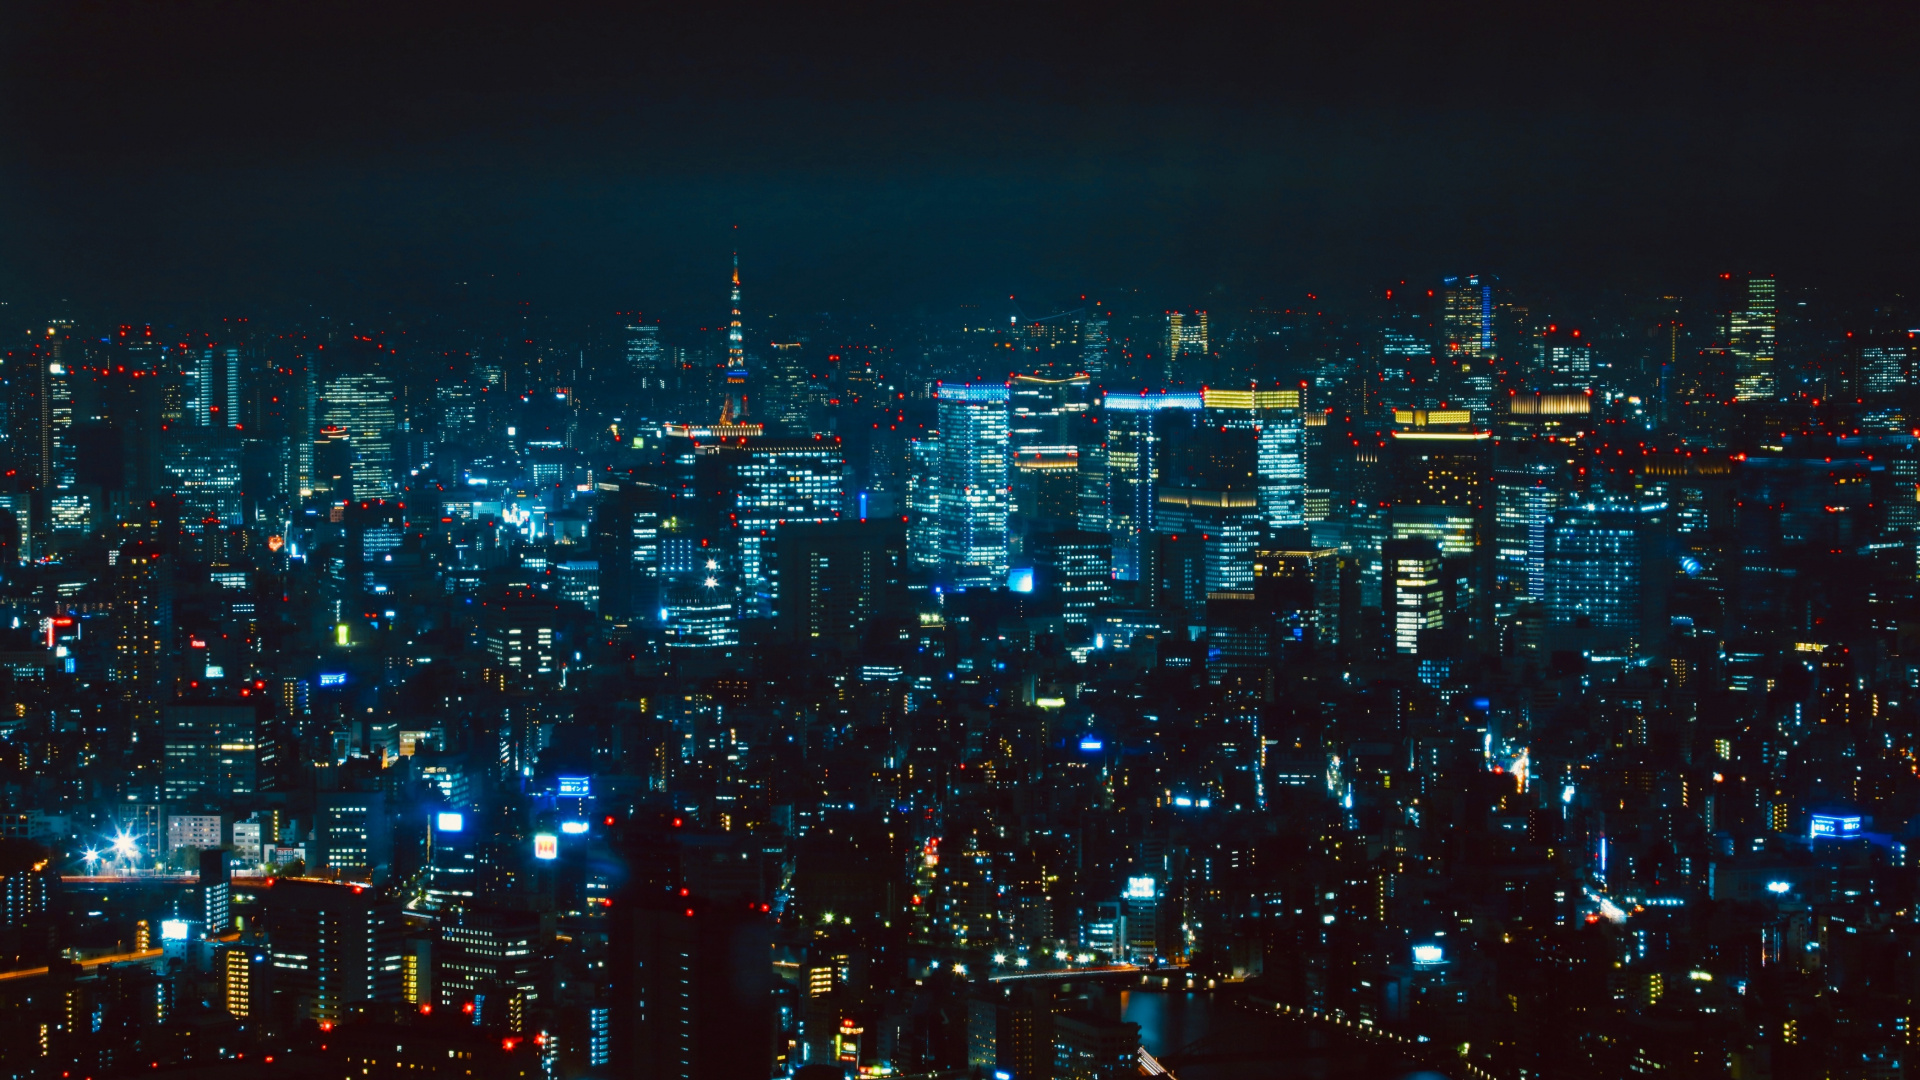 City With High Rise Buildings During Night Time. Wallpaper in 1920x1080 Resolution